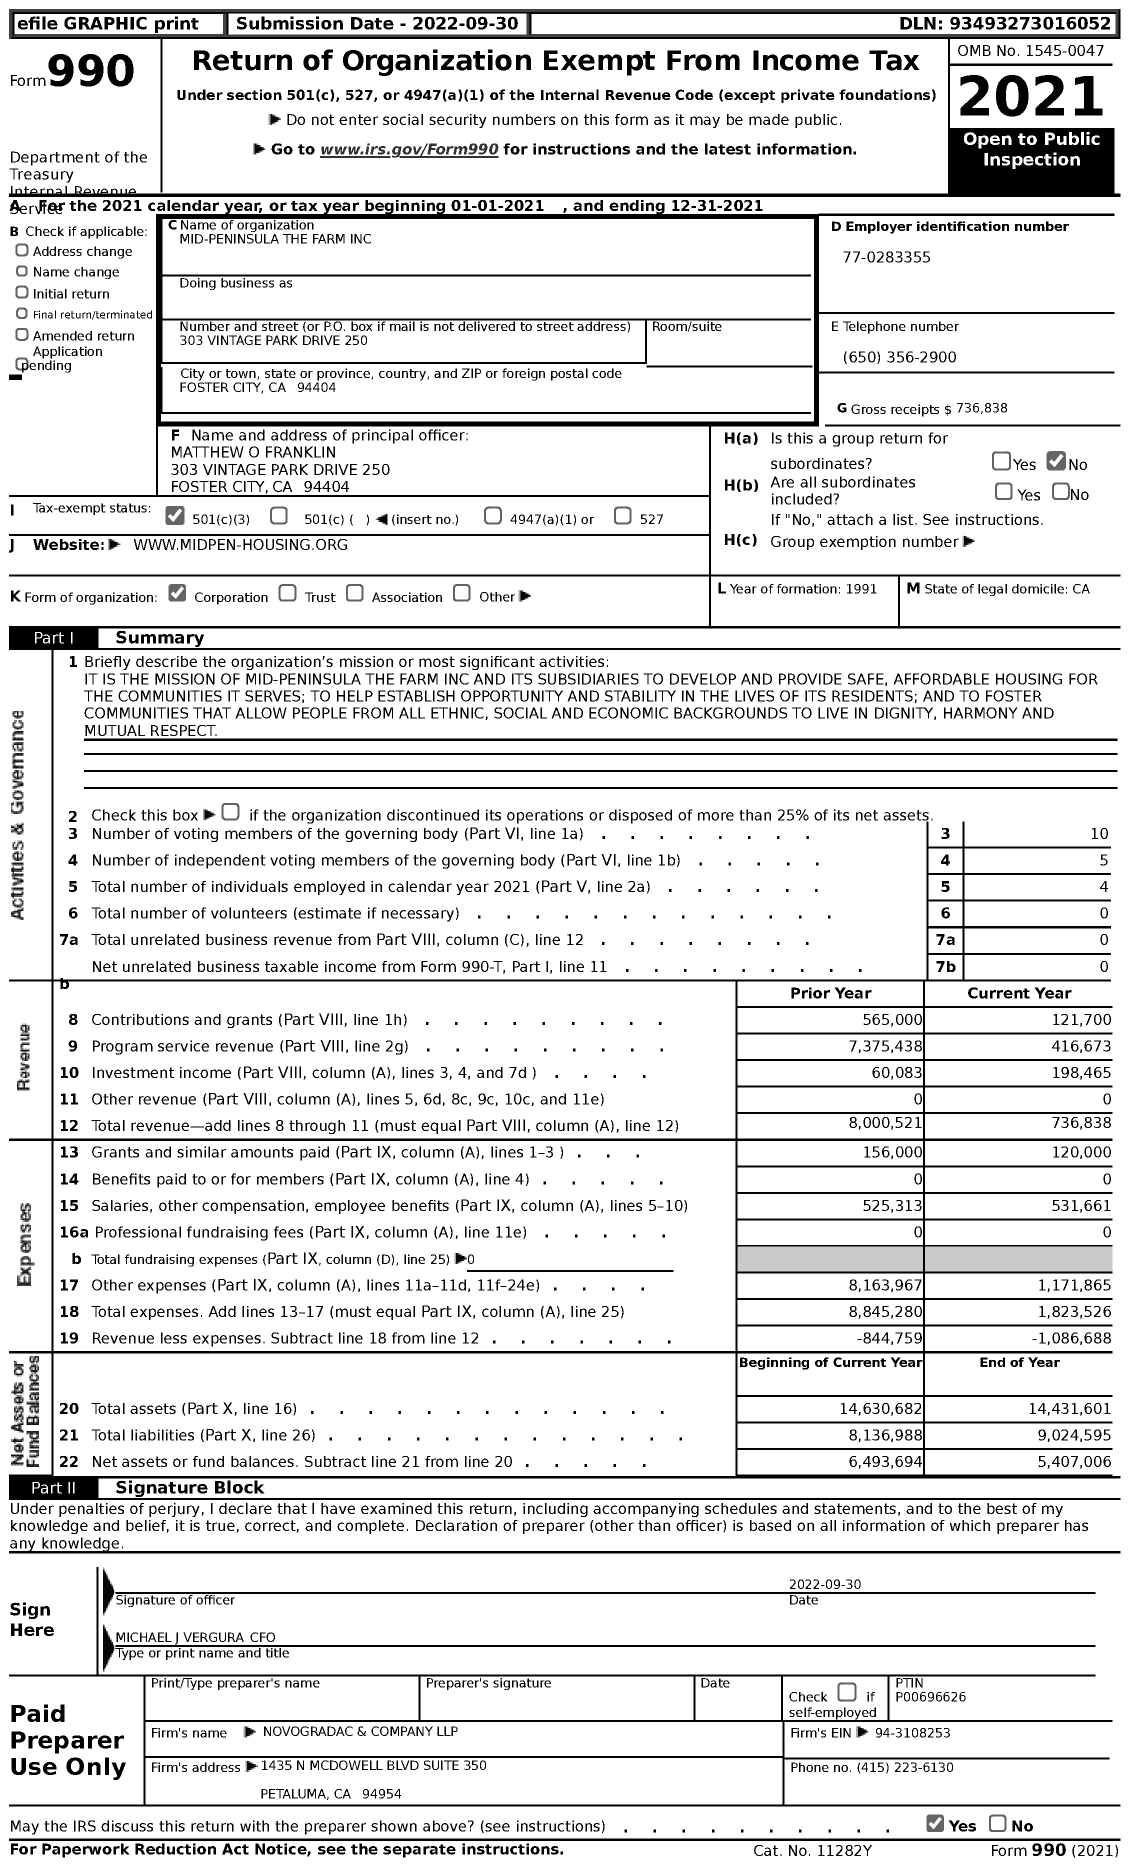 Image of first page of 2021 Form 990 for Mid-Peninsula the Farm